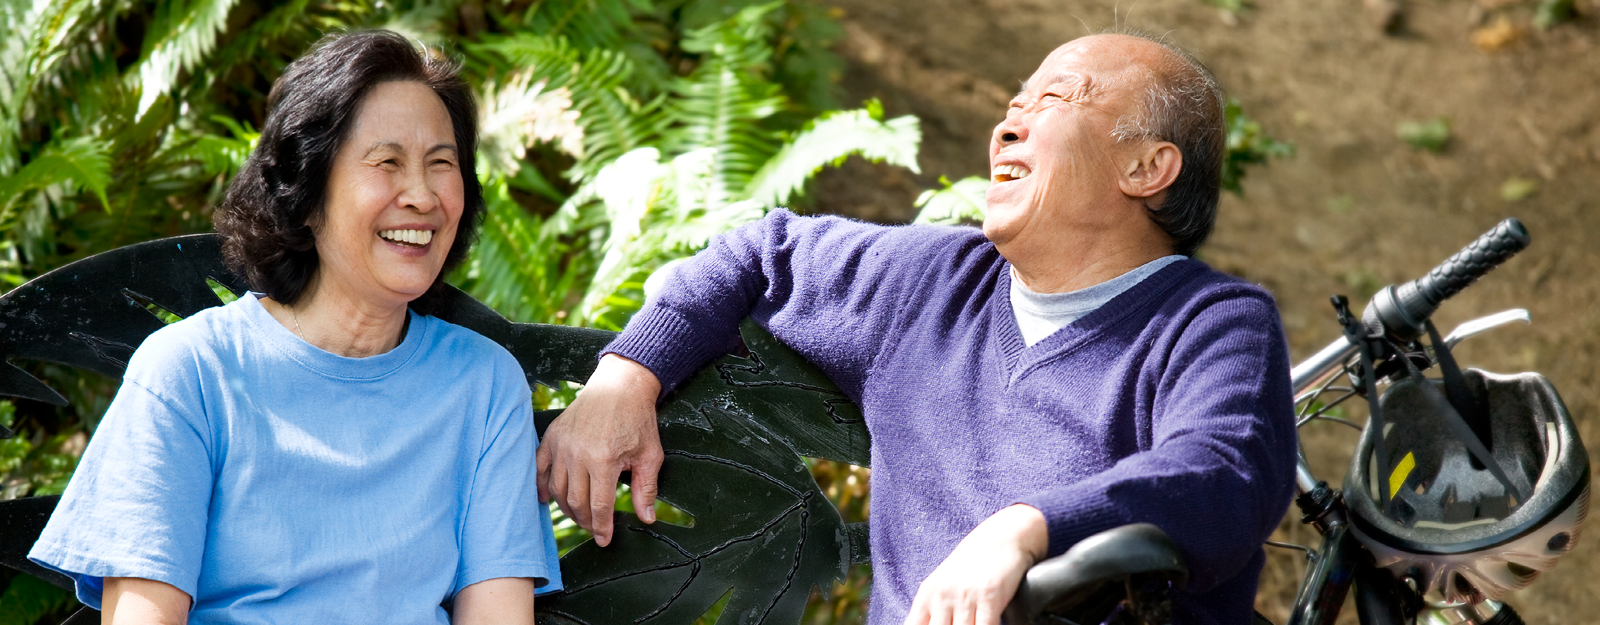 An elderly couple in their 60s sits on a bench and laughs. The man has a mountain bike with a helmet hanging on the handle bars parked beside him.